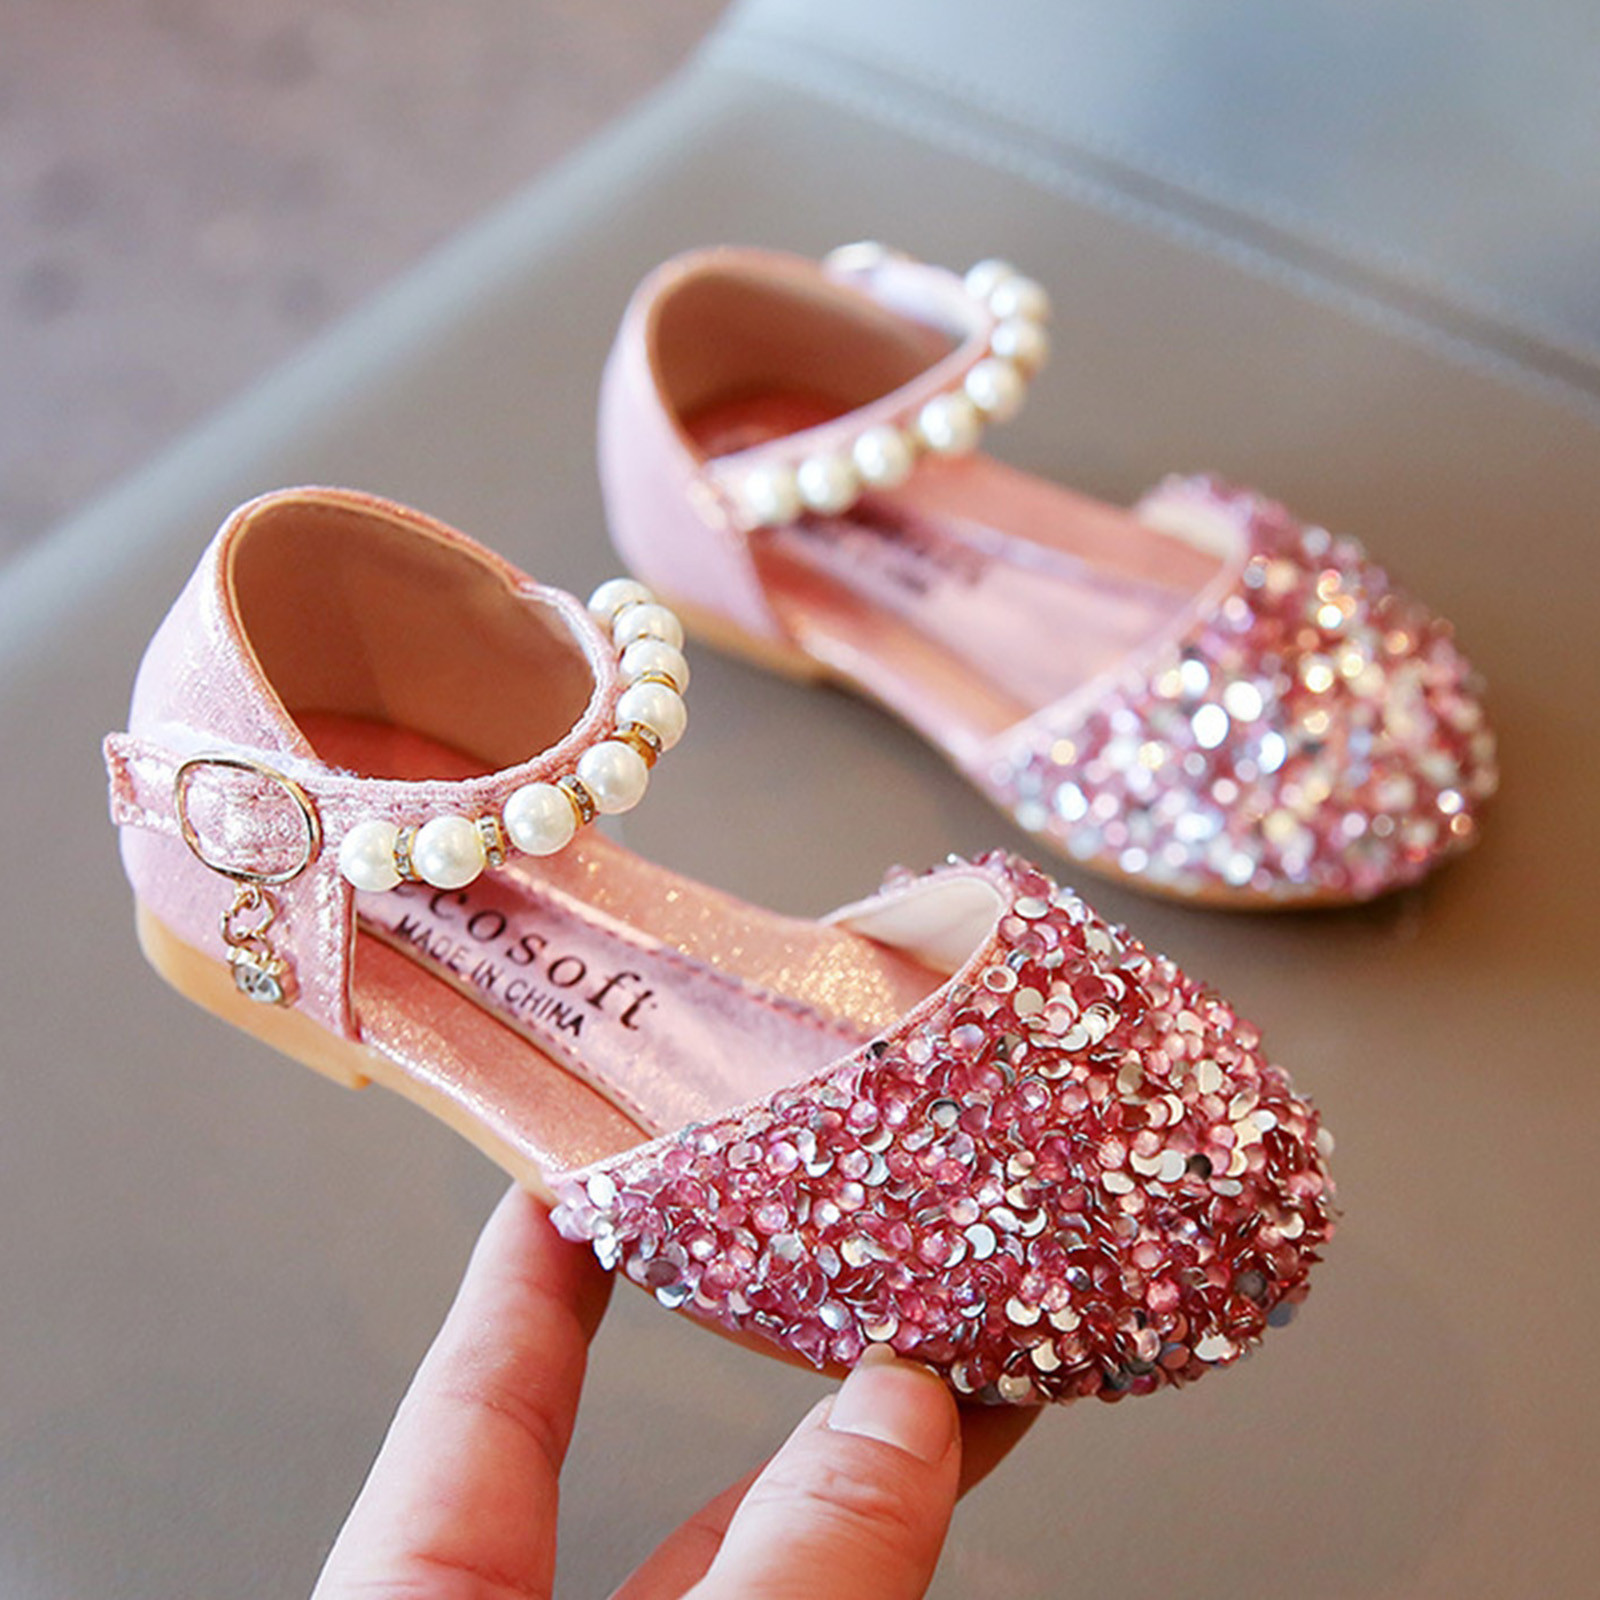 Cathalem Toddler Water Sandals Princess Pumps Dance Shoes Low Heels Rhinestone Sequins Girls Glitter Toddler Girls Jelly Sandals Sandal Pink 5 Years - image 4 of 4